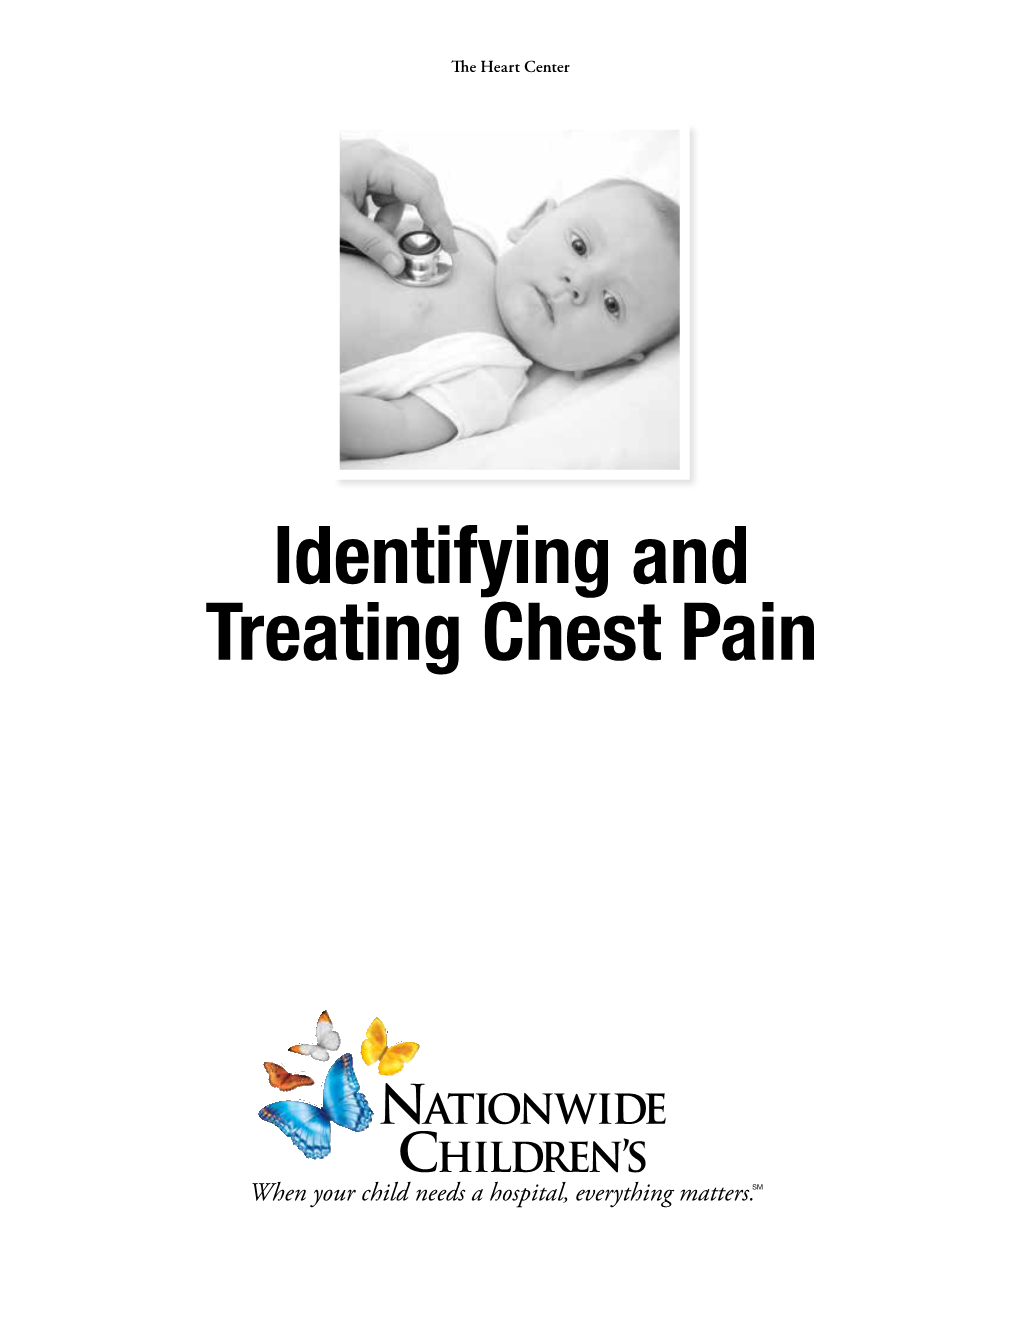 Identifying and Treating Chest Pain Pediatric Chest Pain in Pediatrics, Chest Pain Has a Variety of Symptomatic Levels and Causes